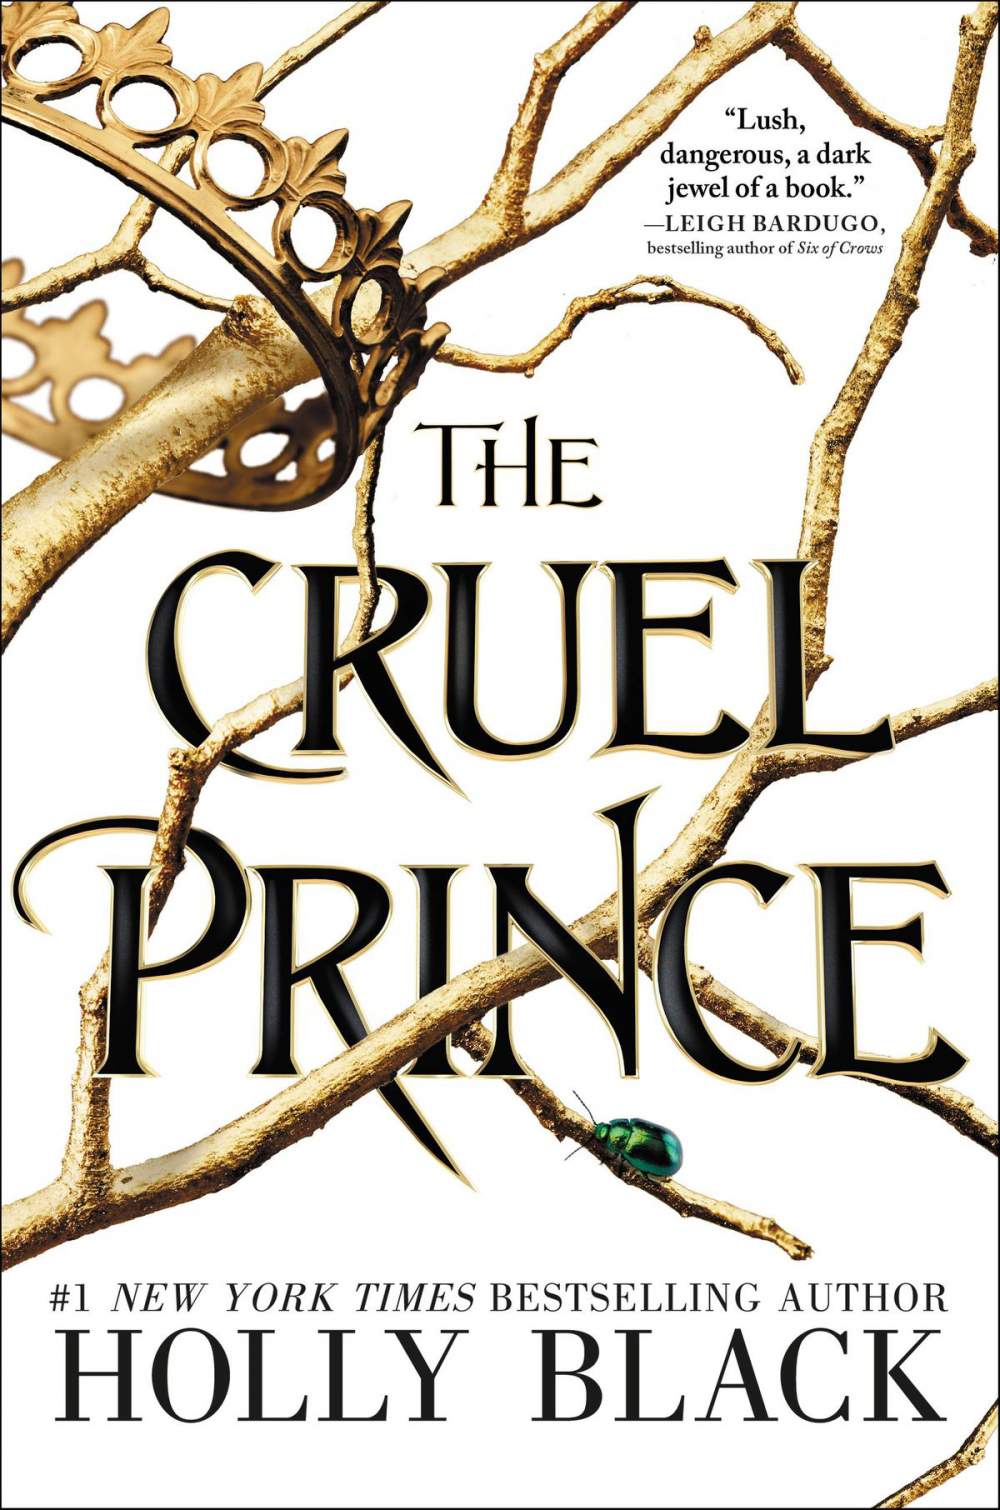 The Cruel Prince series by Holly Black